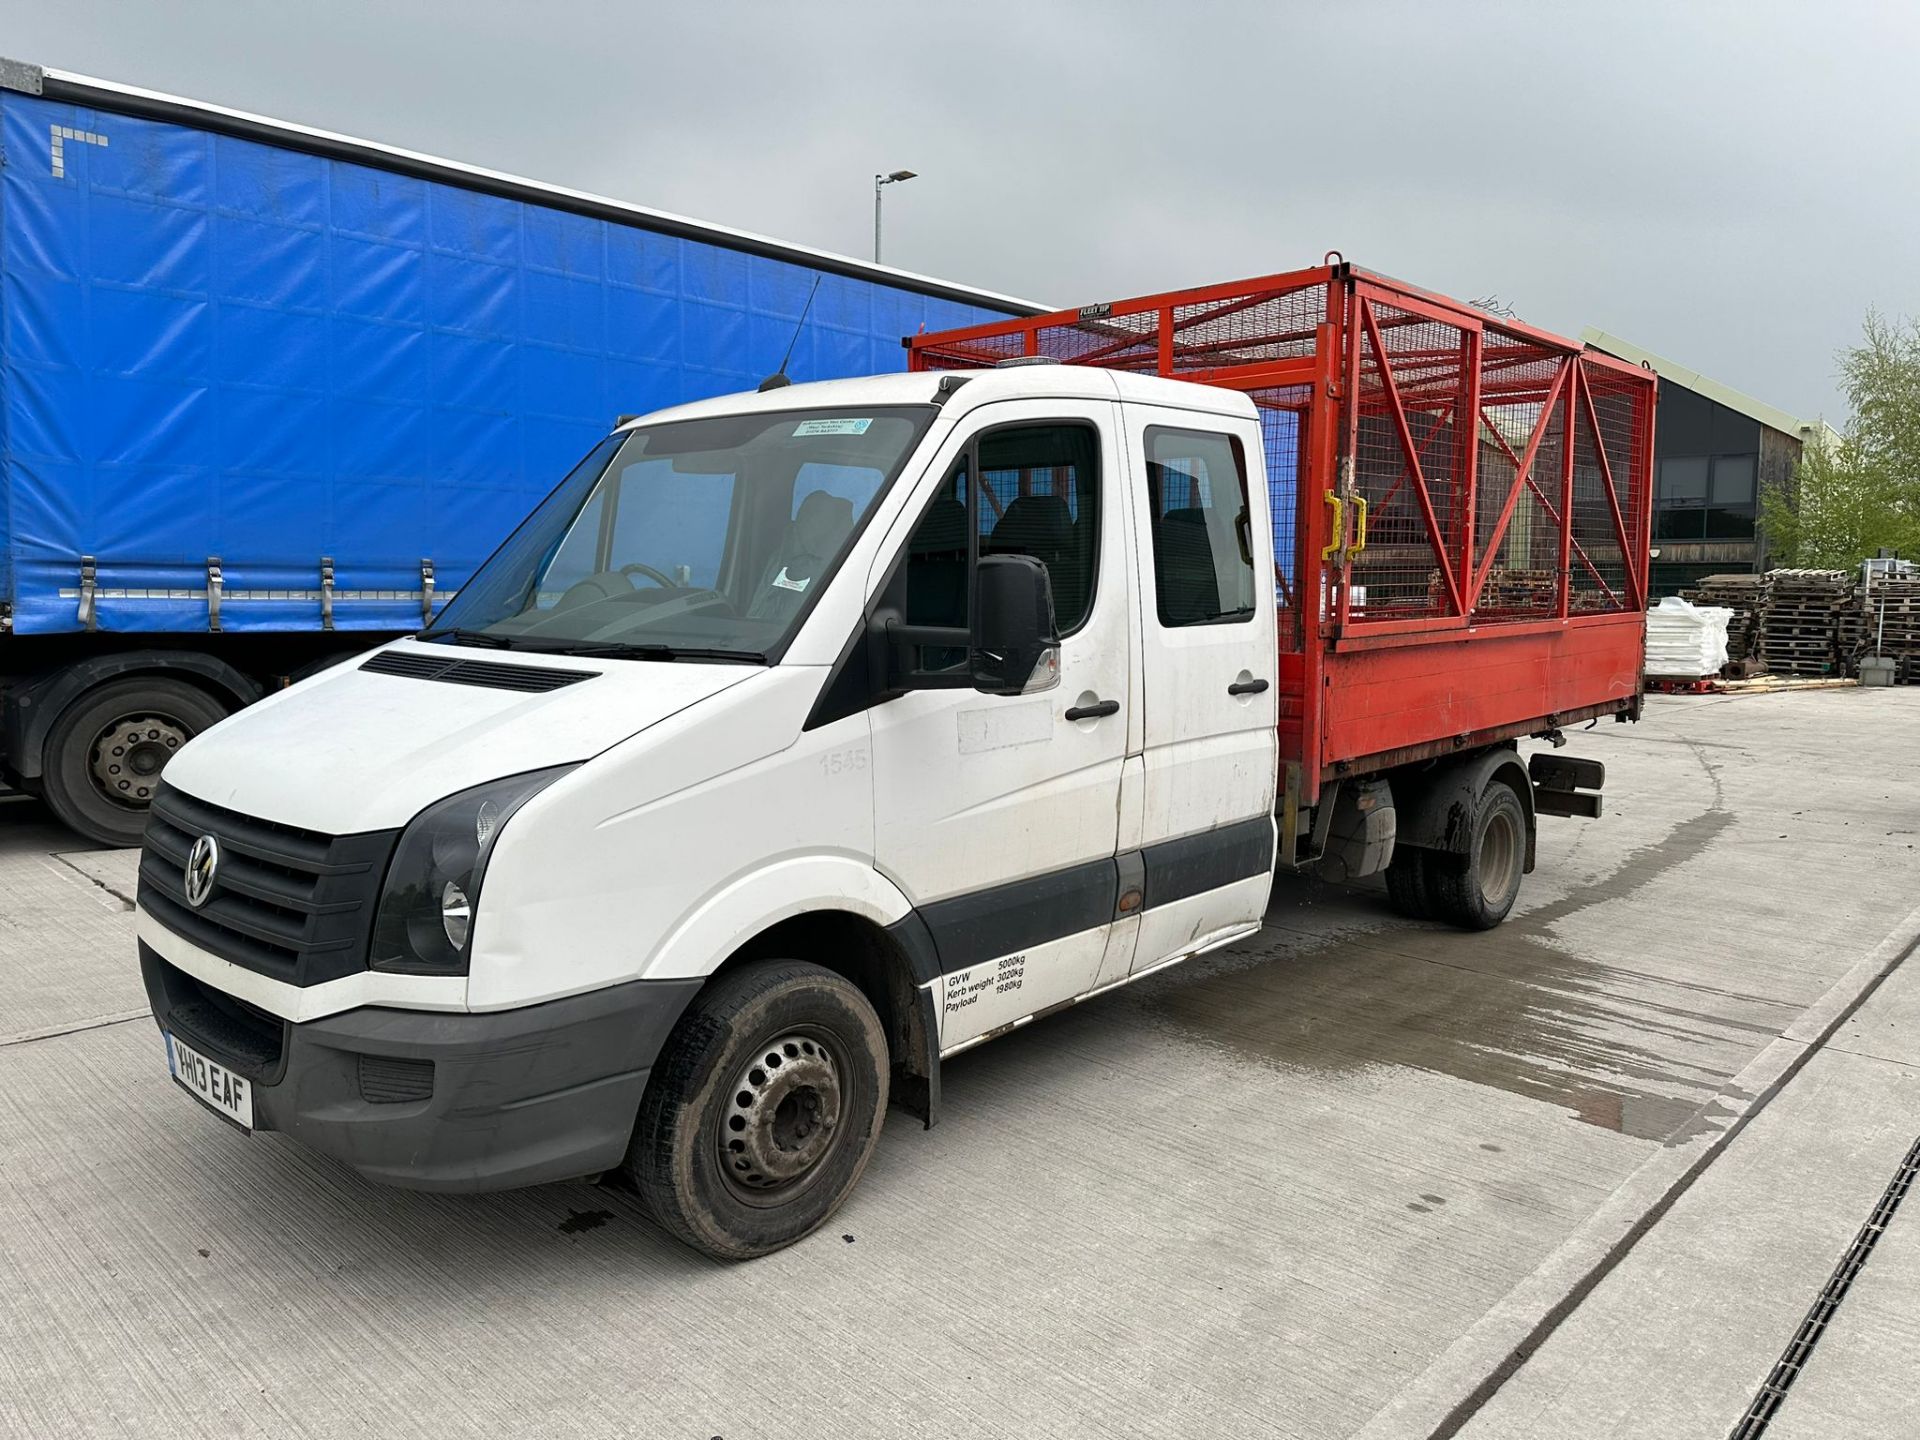 2013 Volkswagen Crafter (Ex Council Fleet Vehicle) Caged Tipper - Image 26 of 40